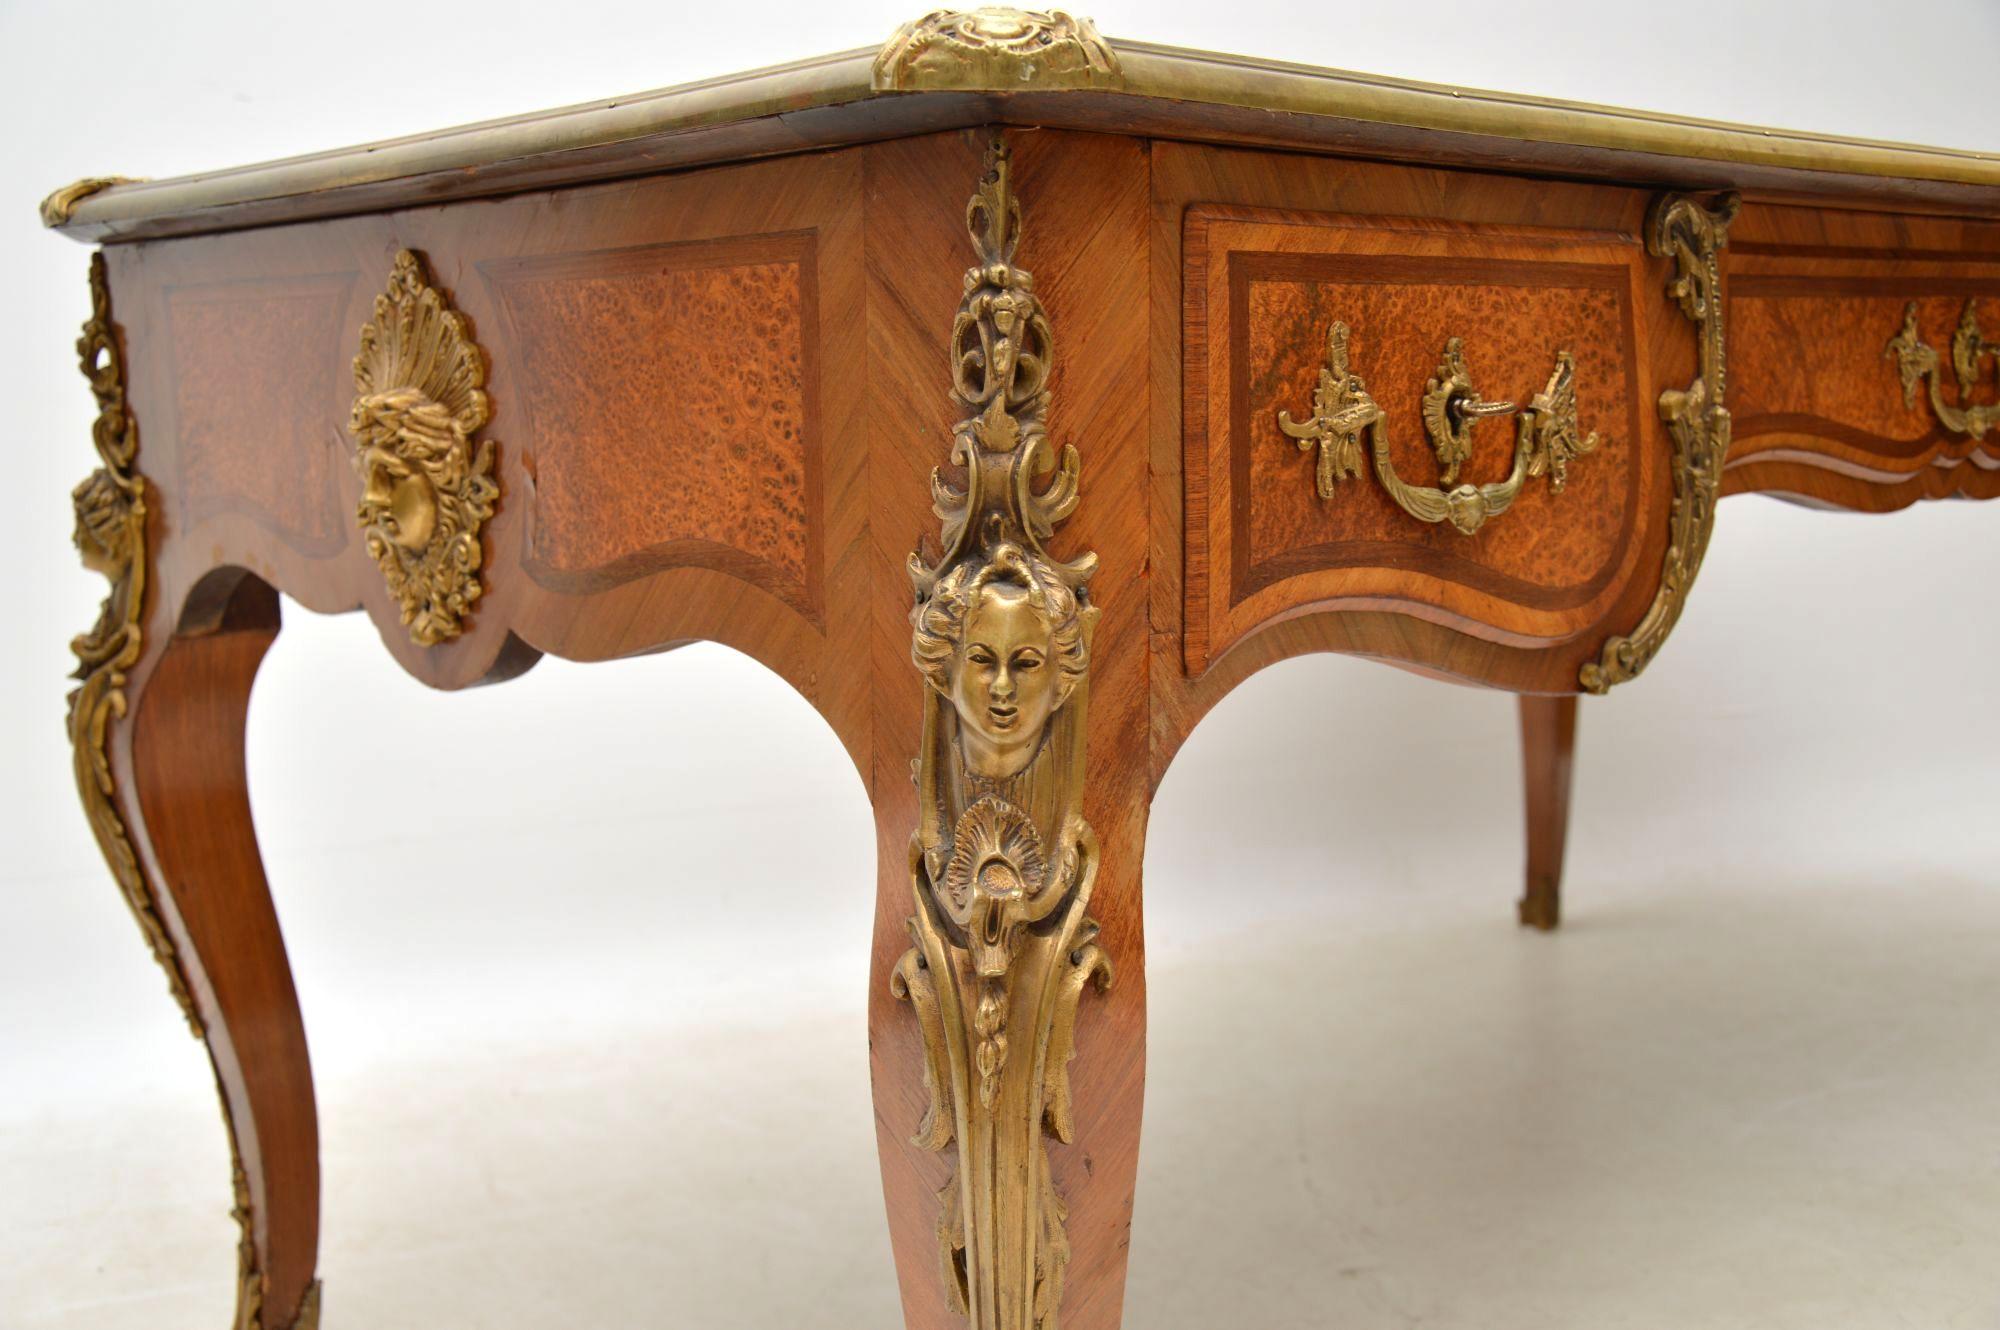 Late 19th Century Large Antique French Gilt Bronze Mounted Kingwood Desk